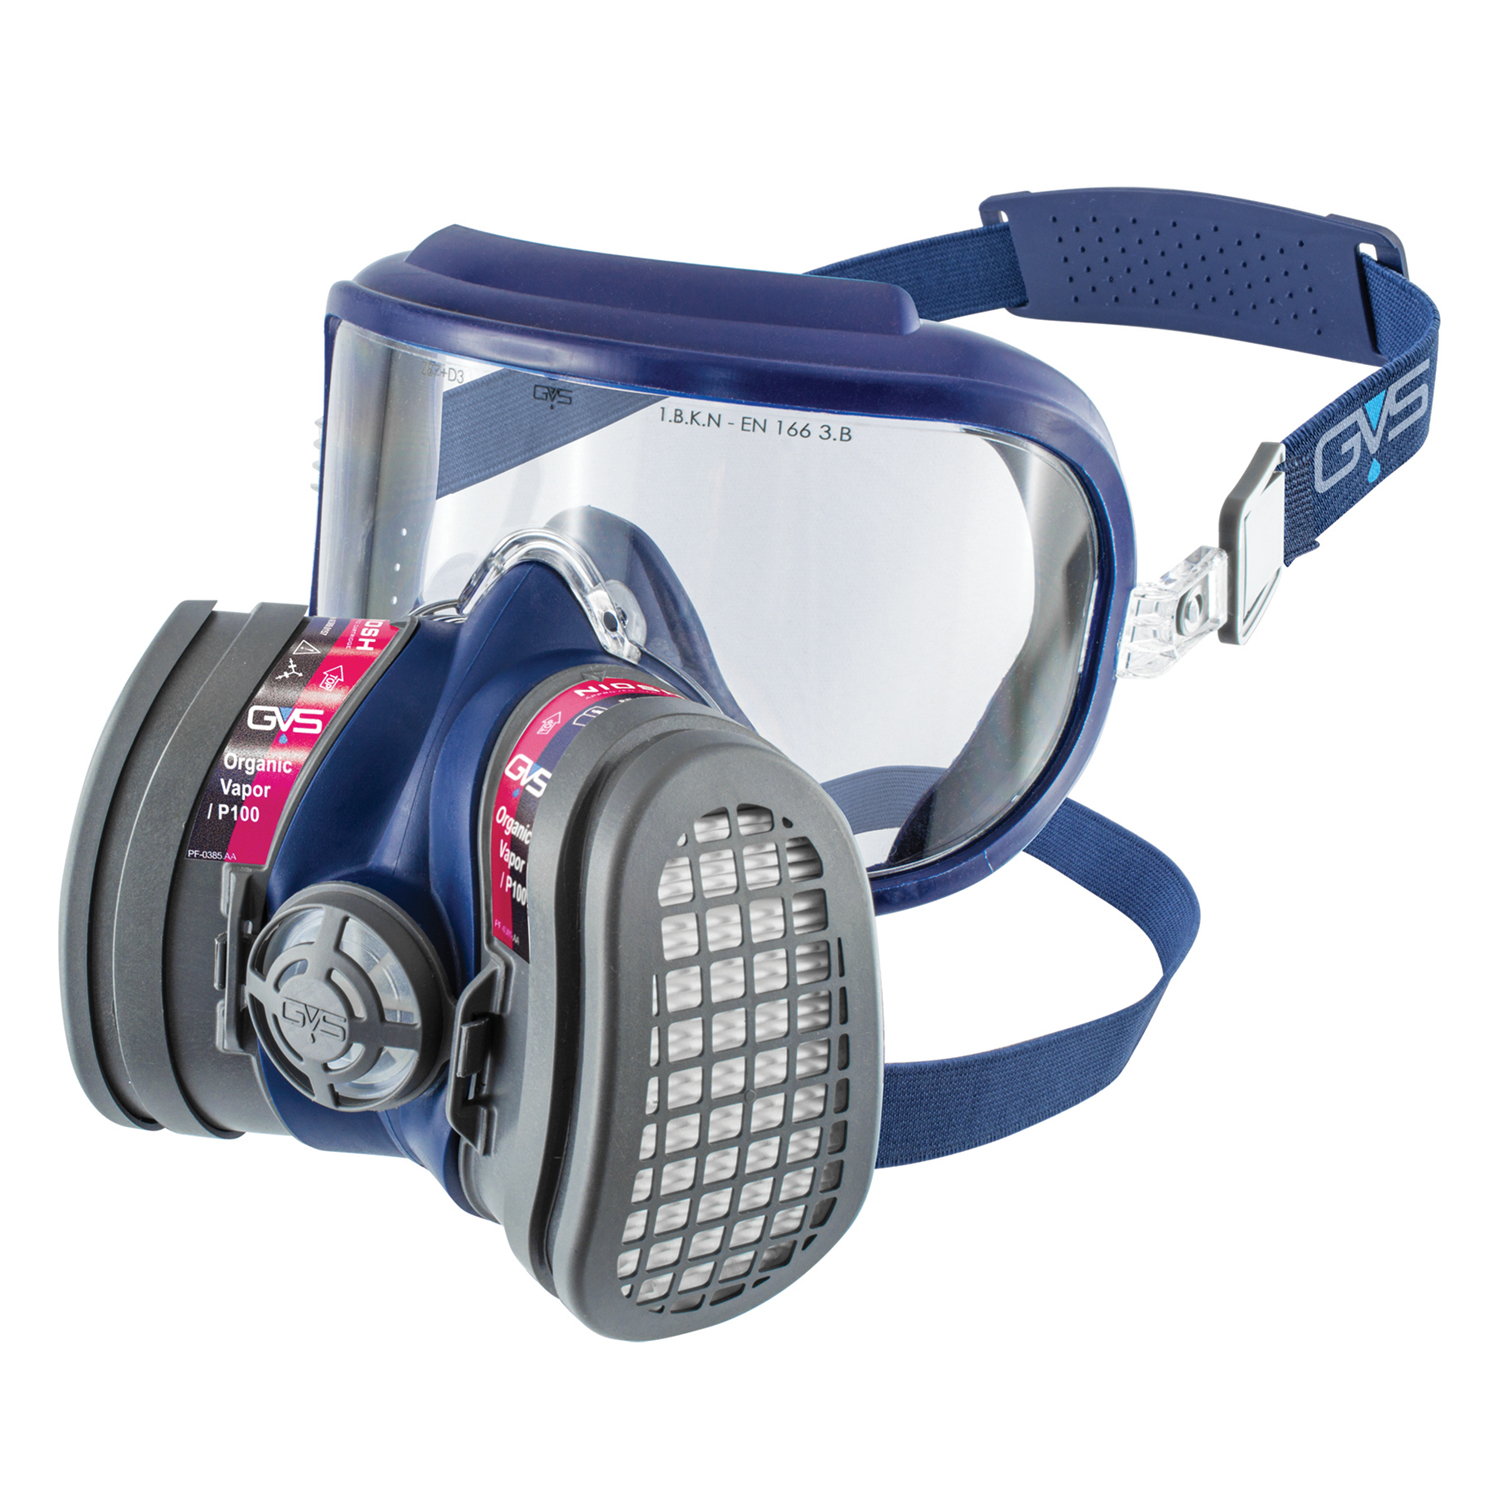 SPR659 S/M Mask w/Organic Vapor/P100 filter and integrated goggles